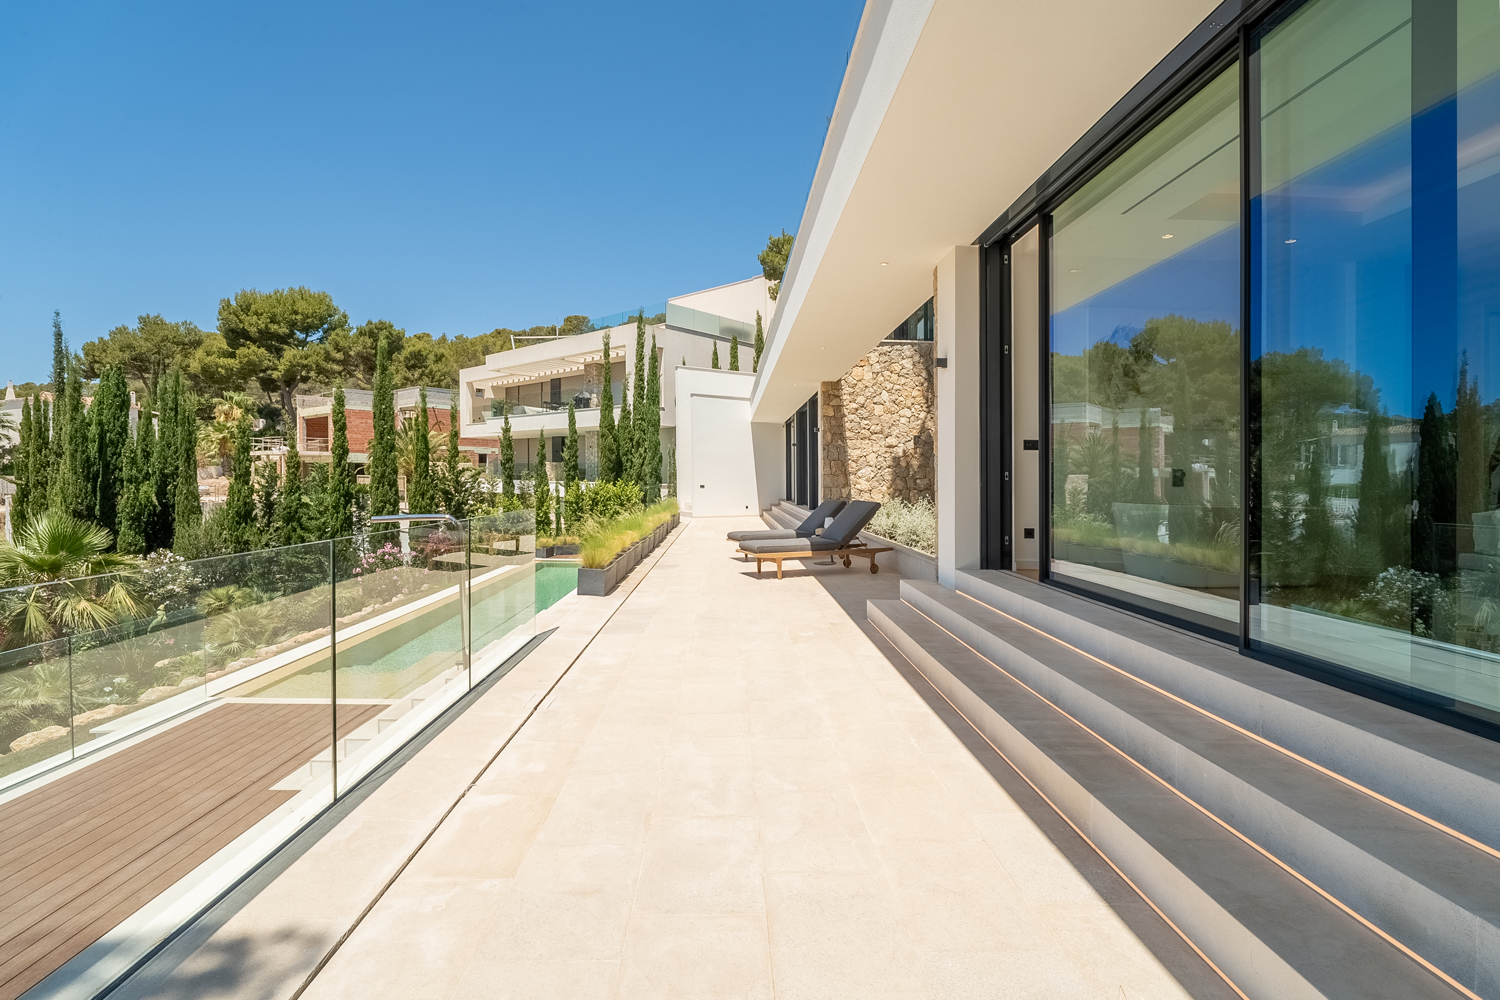 High-quality new-build villa in picturesque location